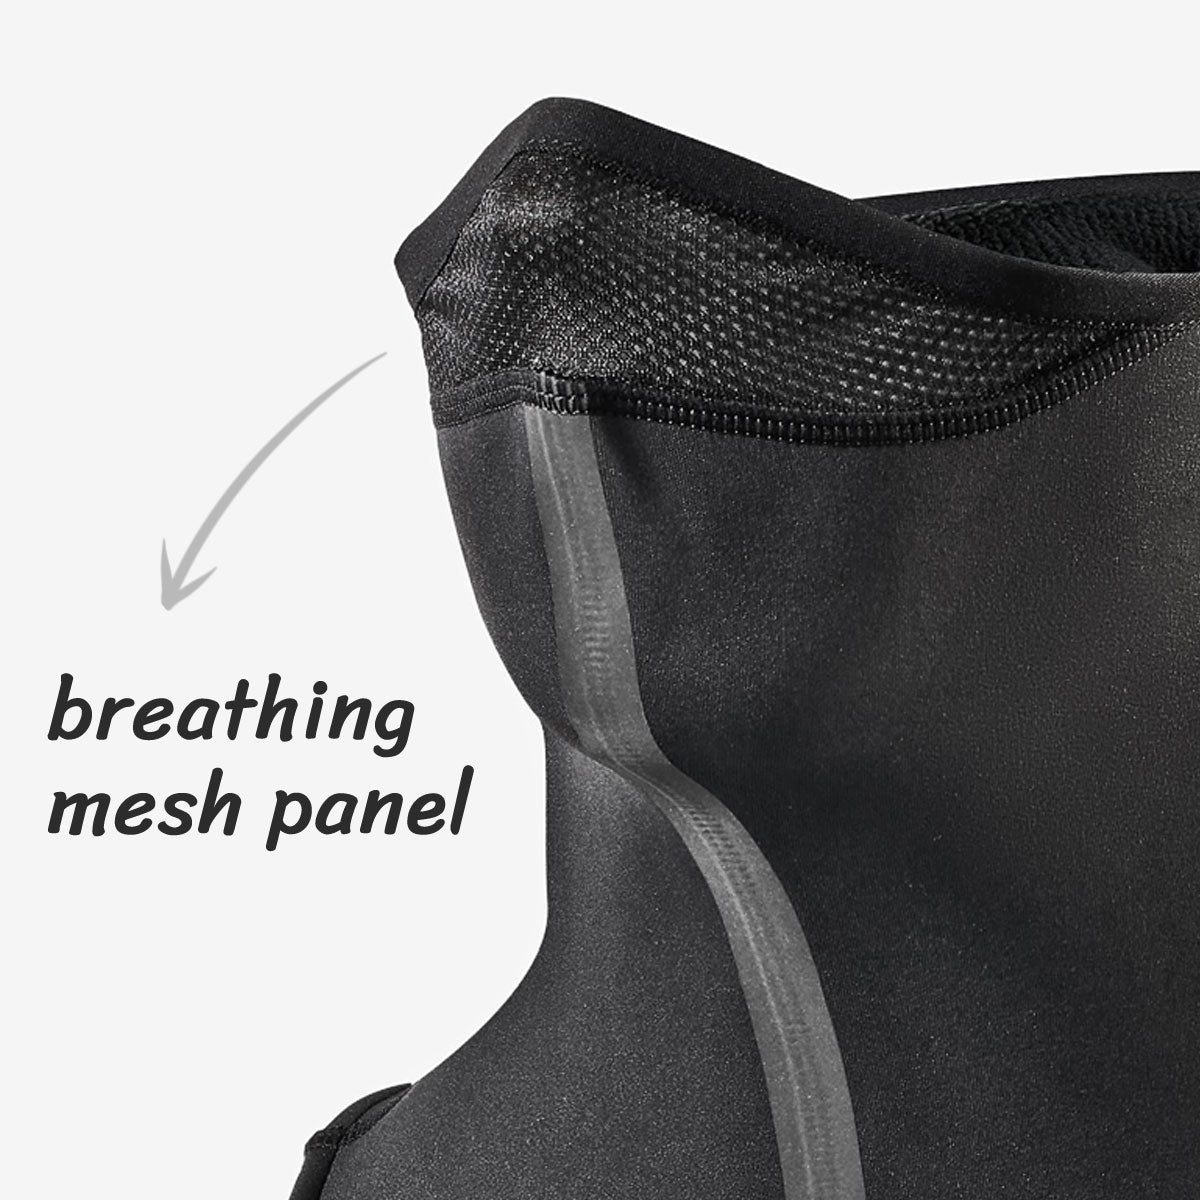 Rev It! Karma 2 Gore-Tex Infinium wind collar: Upgrade on a bestselling neck warmer to make it even better - mesh breathing panel